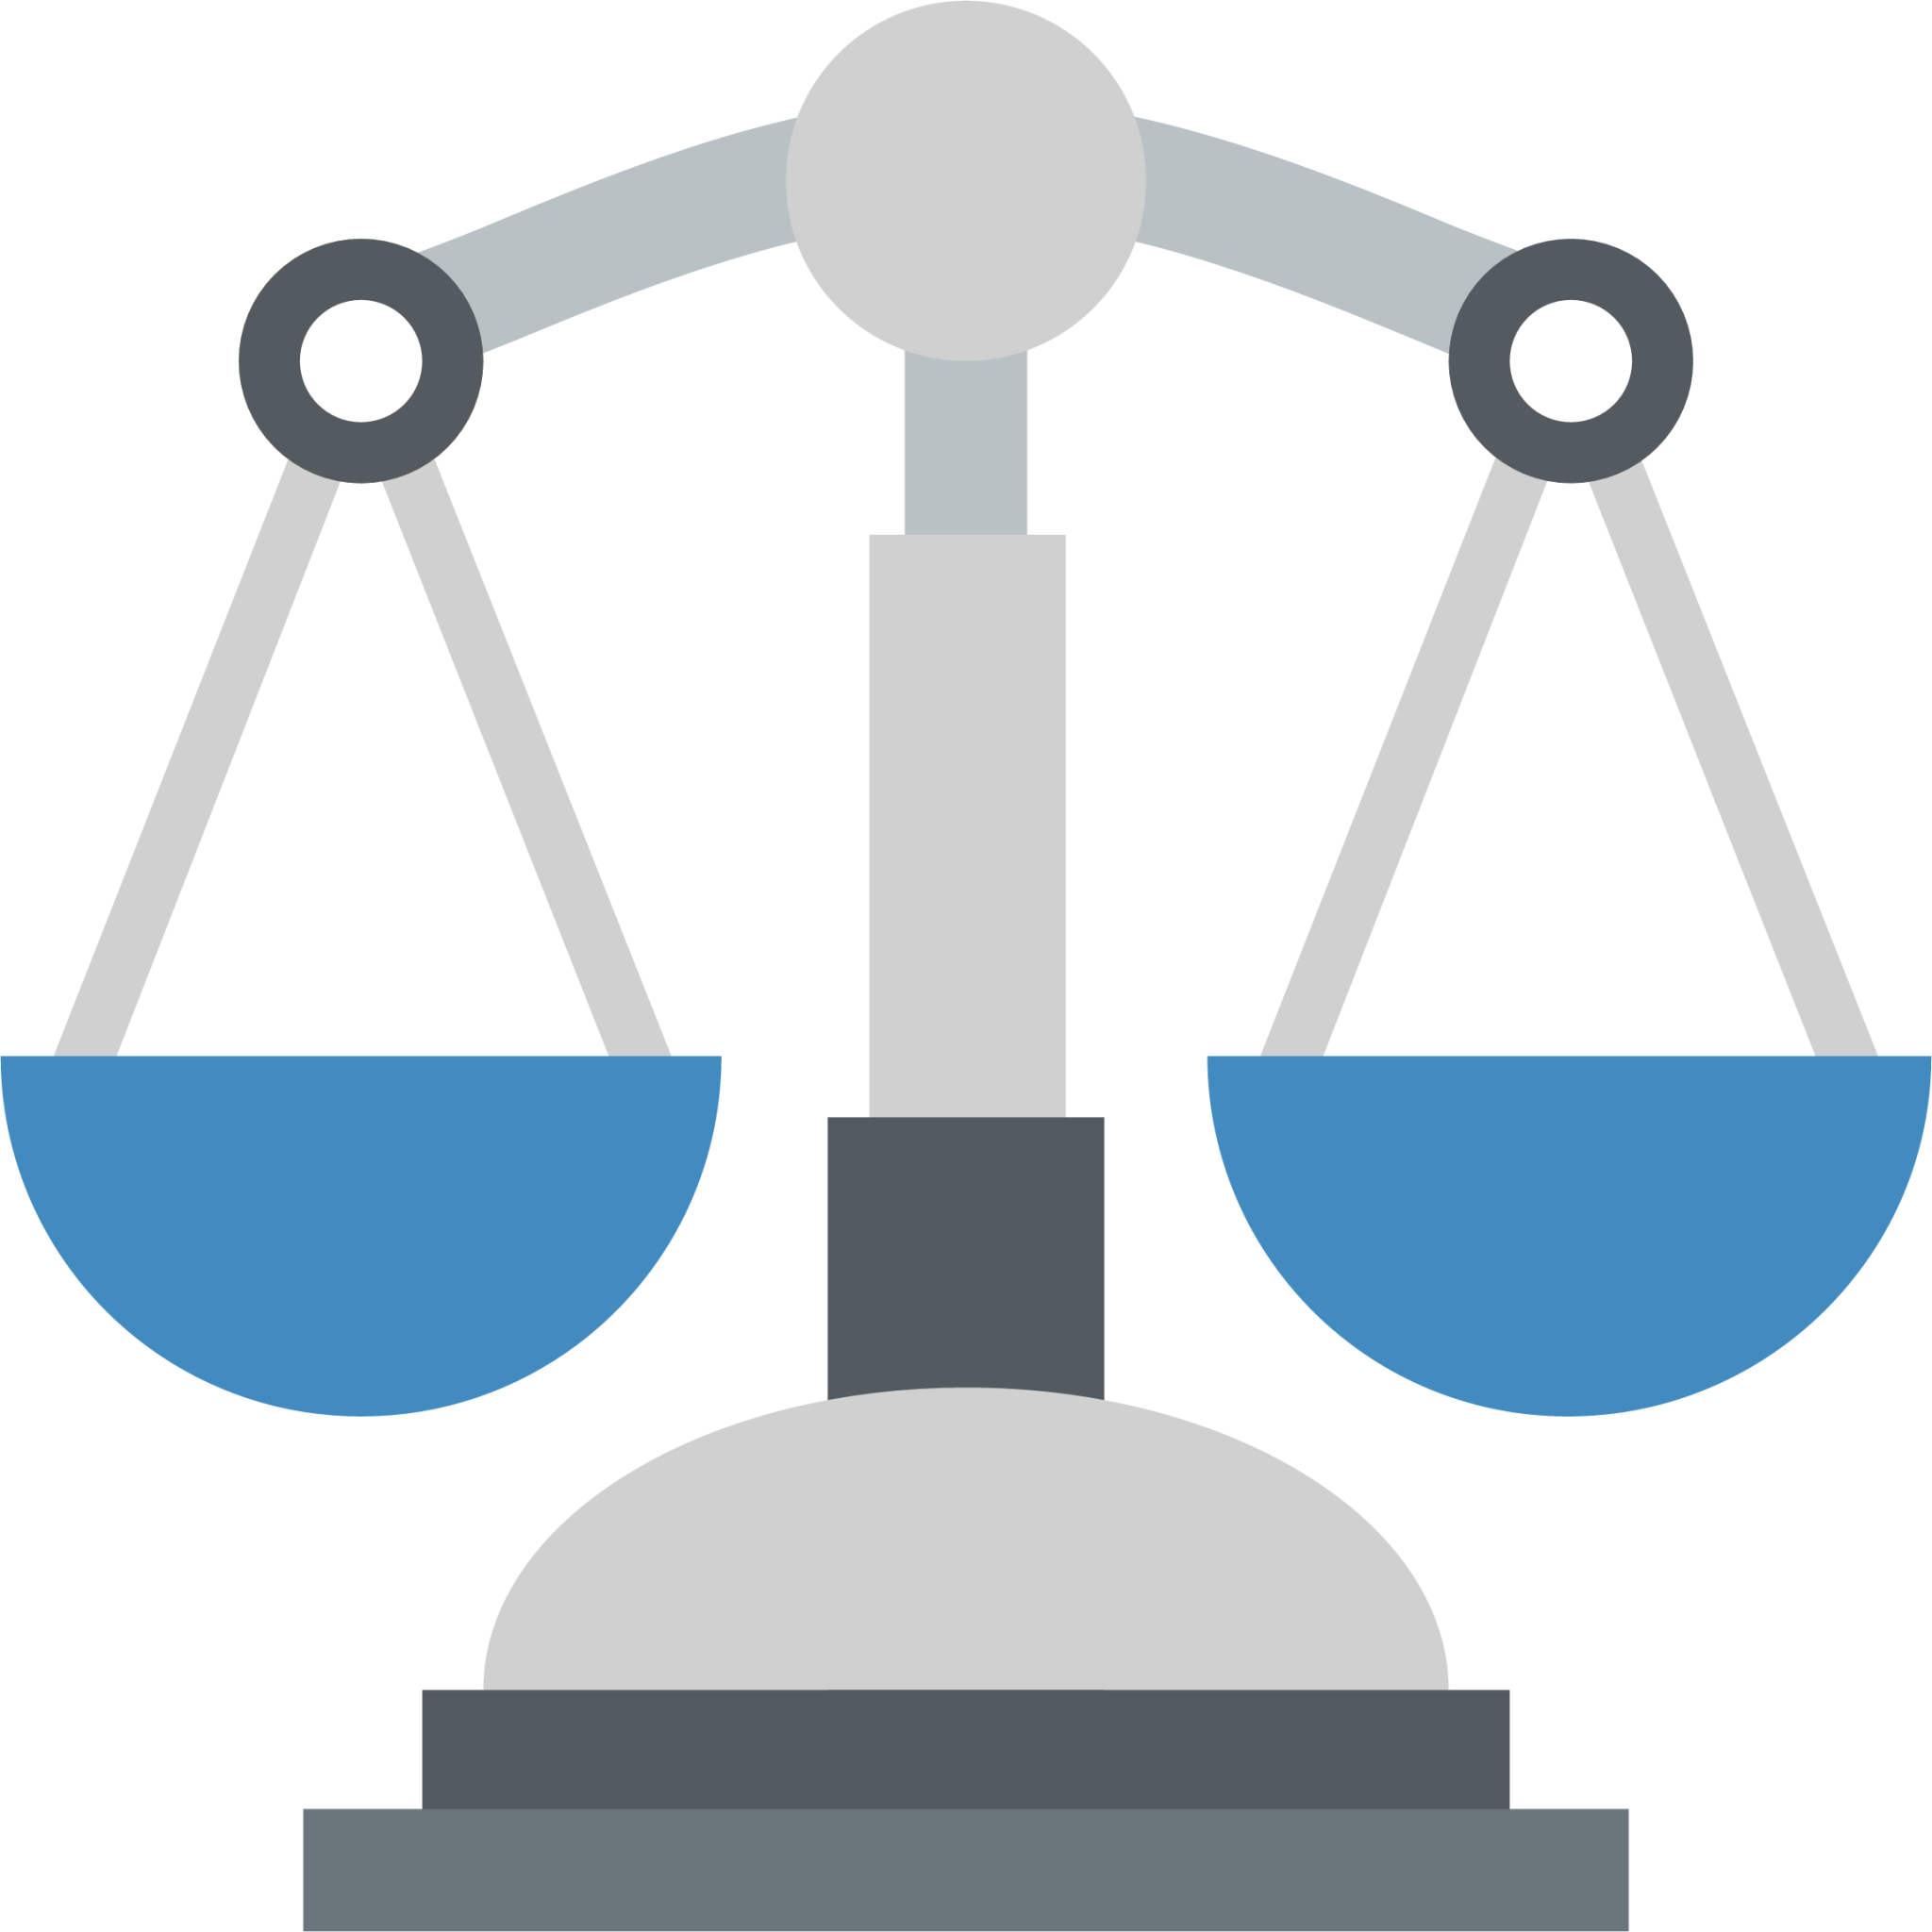 Balance, justice, libra, scale, weighing scale, weight, emoji icon